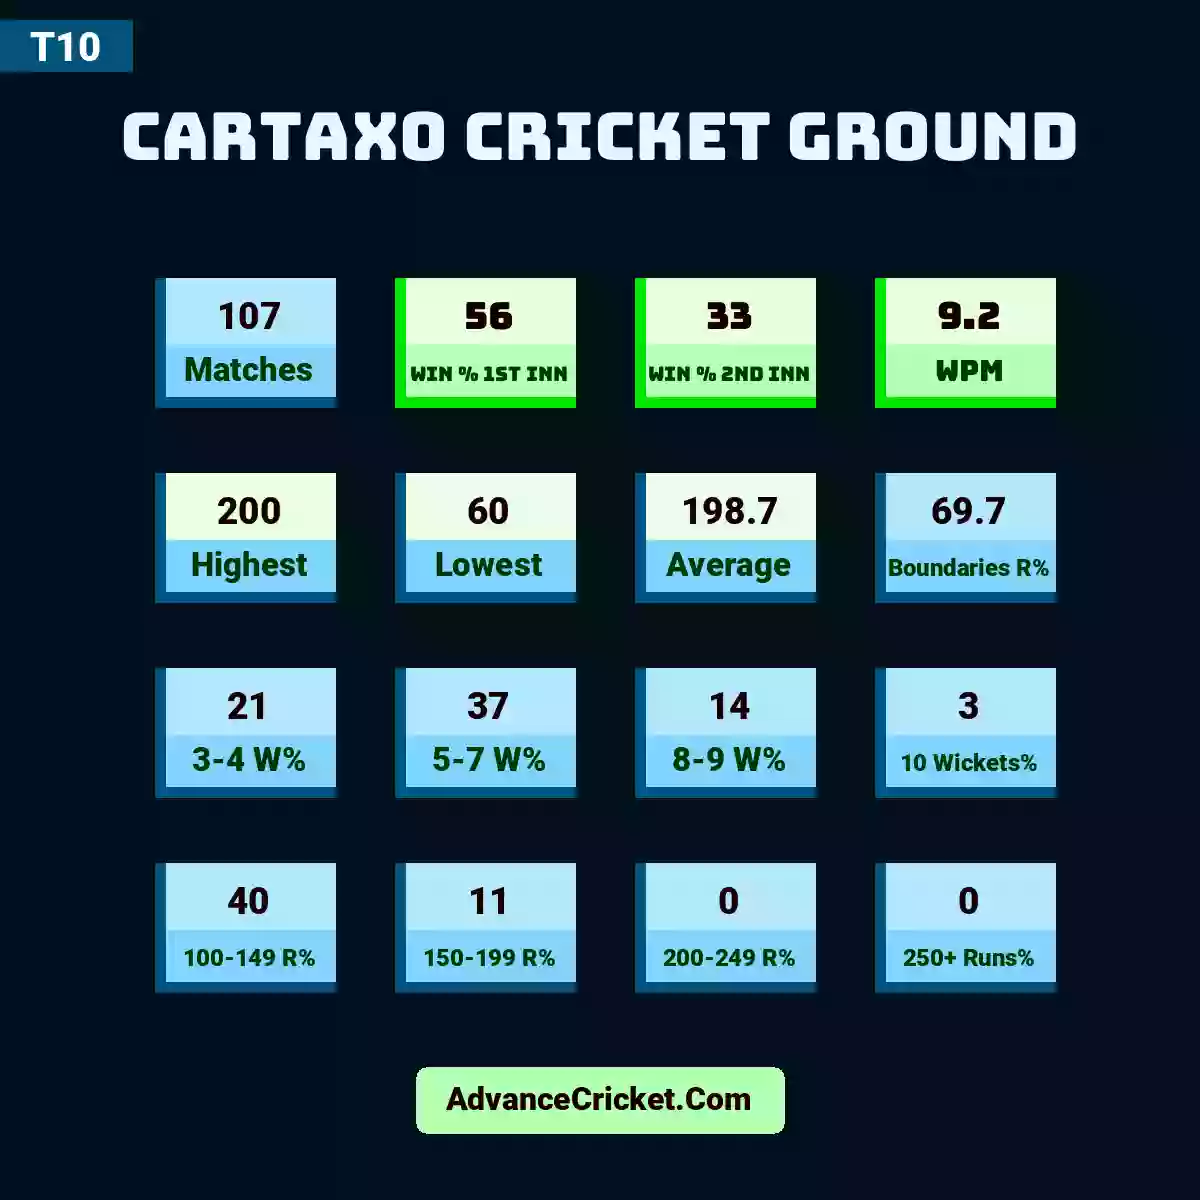 Image showing Cartaxo Cricket Ground T10 with Matches: 107, Win % 1st Inn: 56, Win % 2nd Inn: 33, WPM: 9.2, Highest: 200, Lowest: 60, Average: 198.7, Boundaries R%: 69.7, 3-4 W%: 21, 5-7 W%: 37, 8-9 W%: 14, 10 Wickets%: 3, 100-149 R%: 40, 150-199 R%: 11, 200-249 R%: 0, 250+ Runs%: 0.